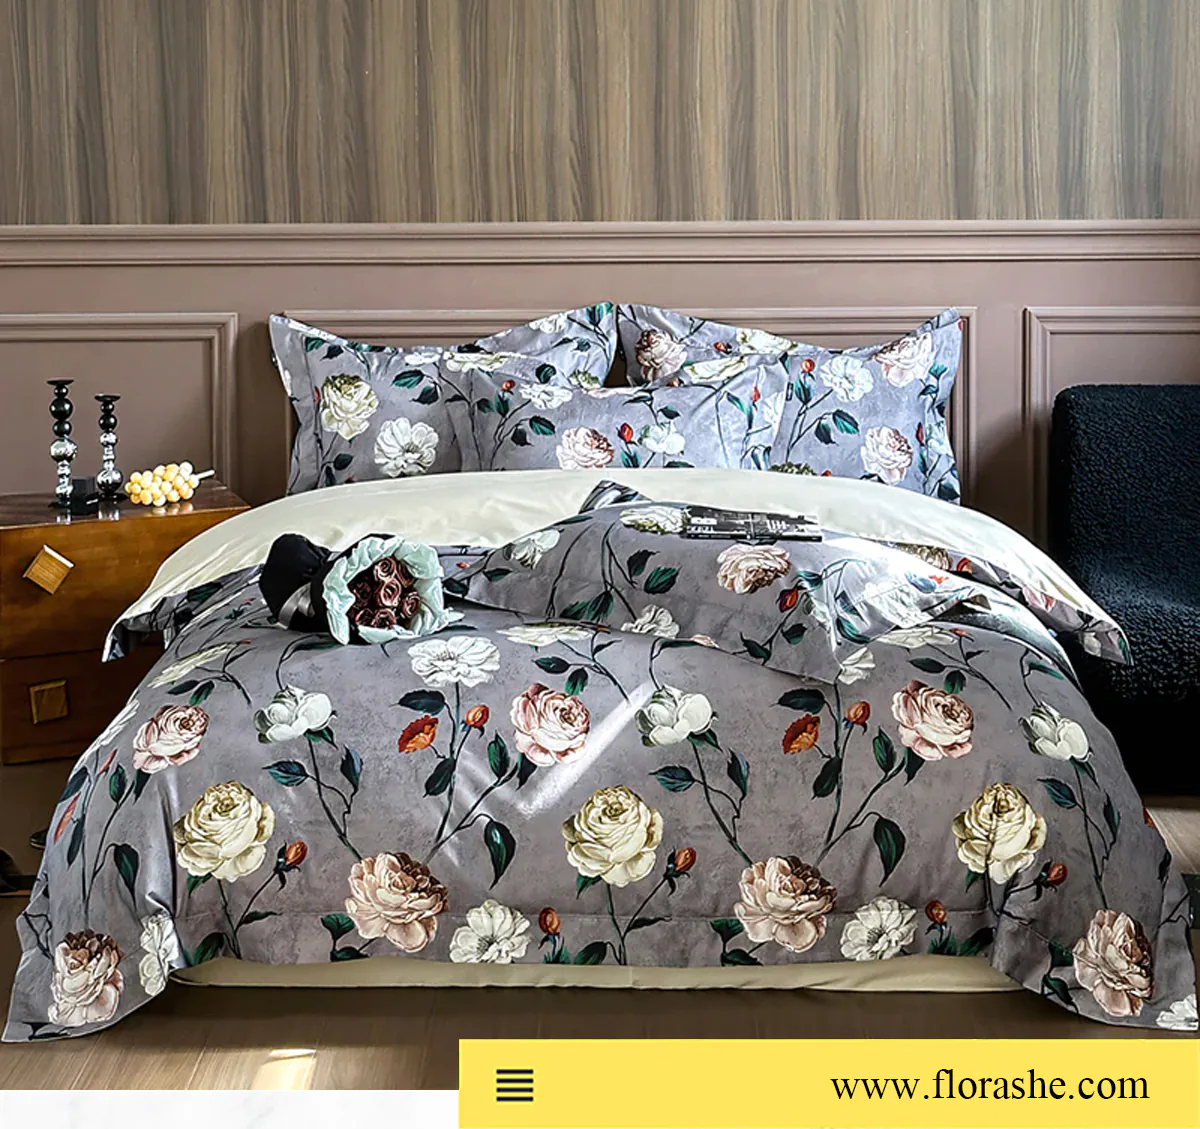 Aesthetic-100S-AB-Side-Floral-Print-Egyptian-Cotton-Bedding-Set10